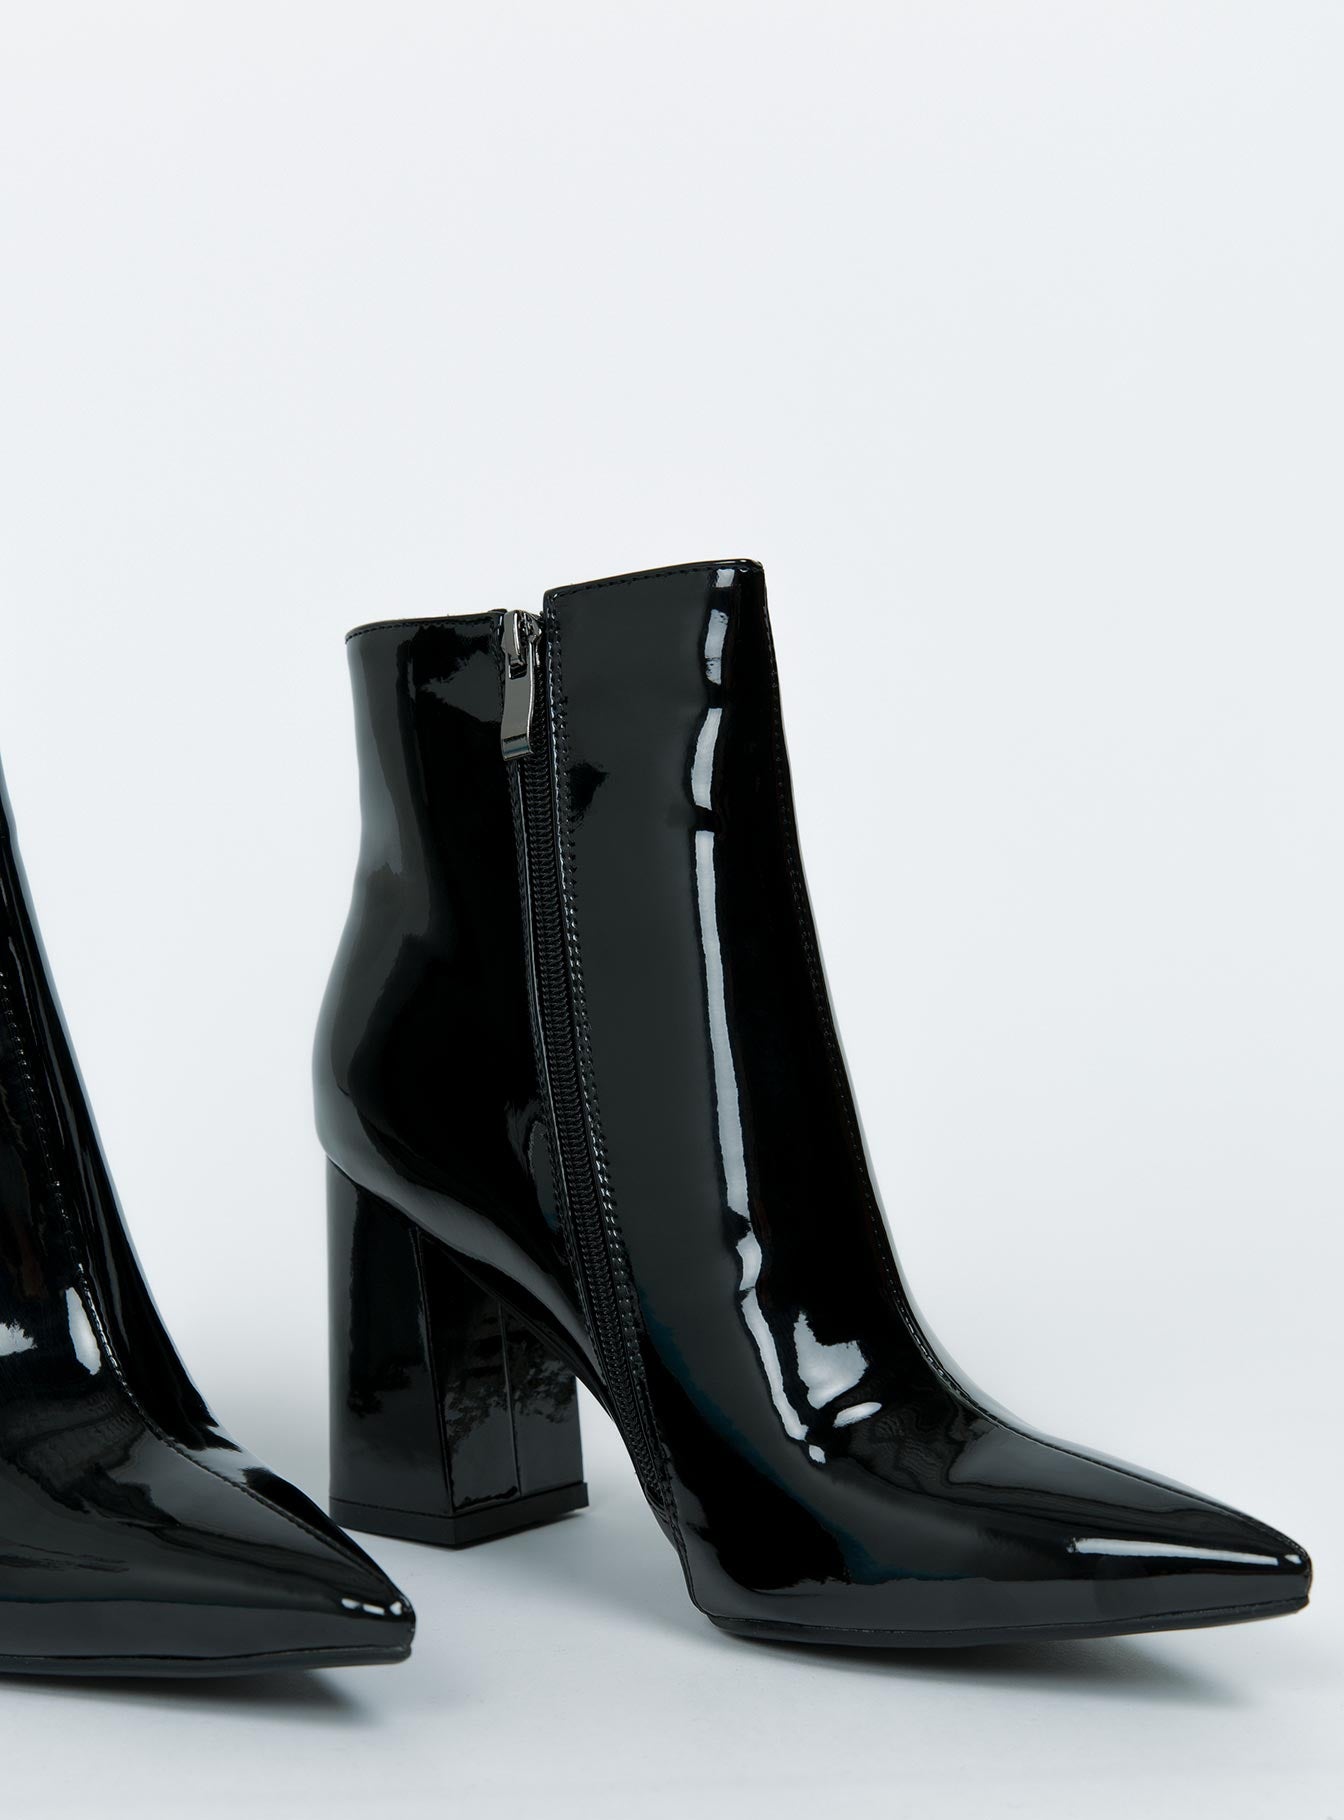 Therapy Black Patent Alloy Boots